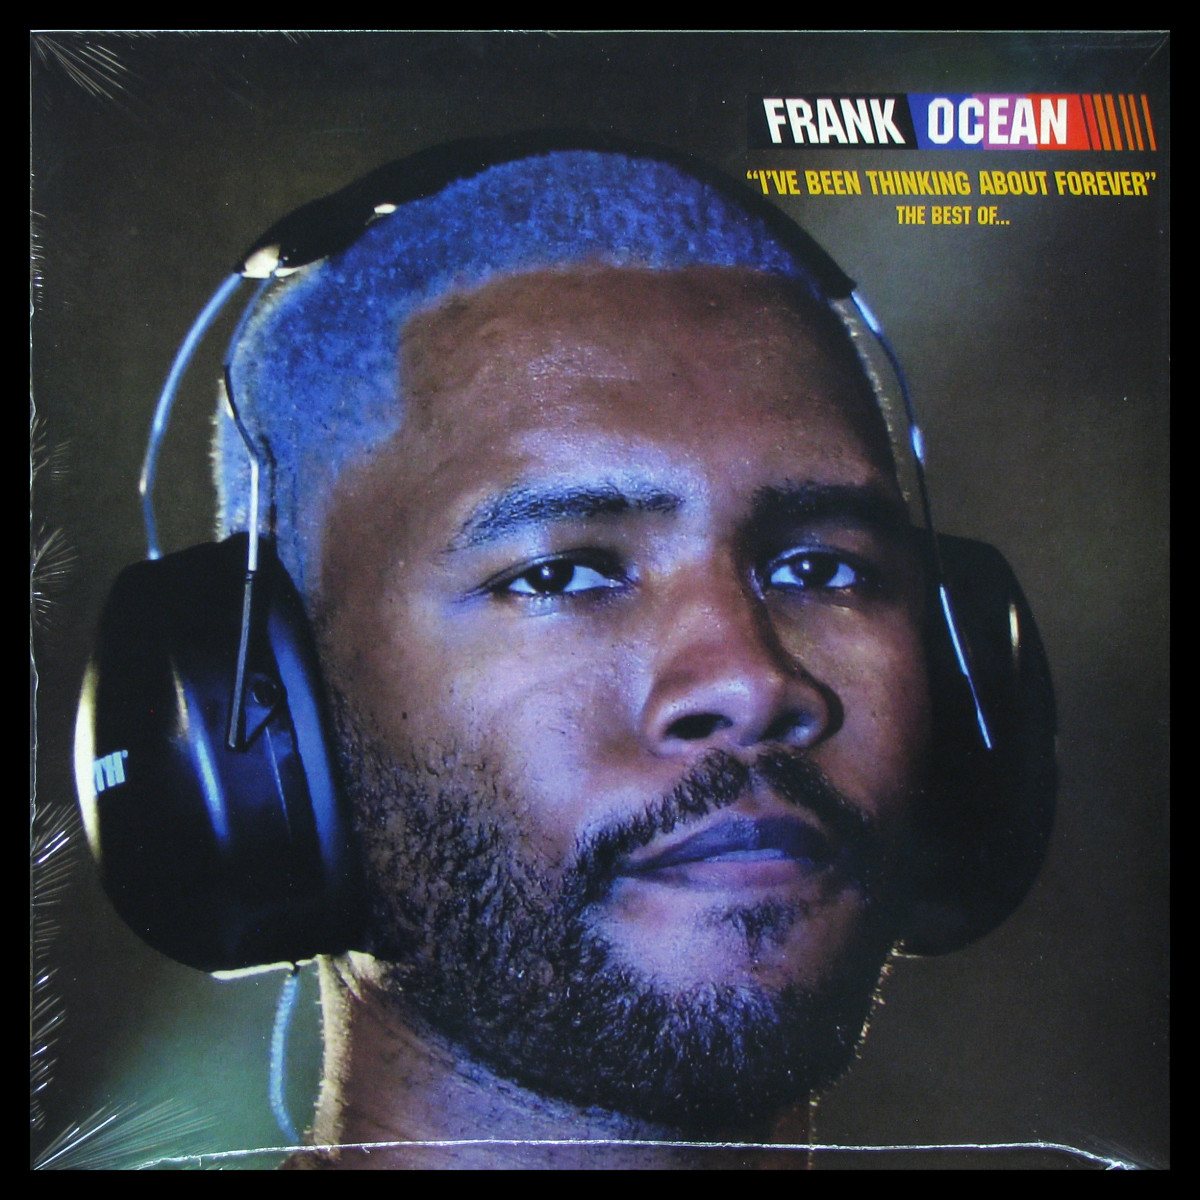 LP Frank Ocean — I've Been Thinking About Forever - The Best Of... (coloured vinyl) фото